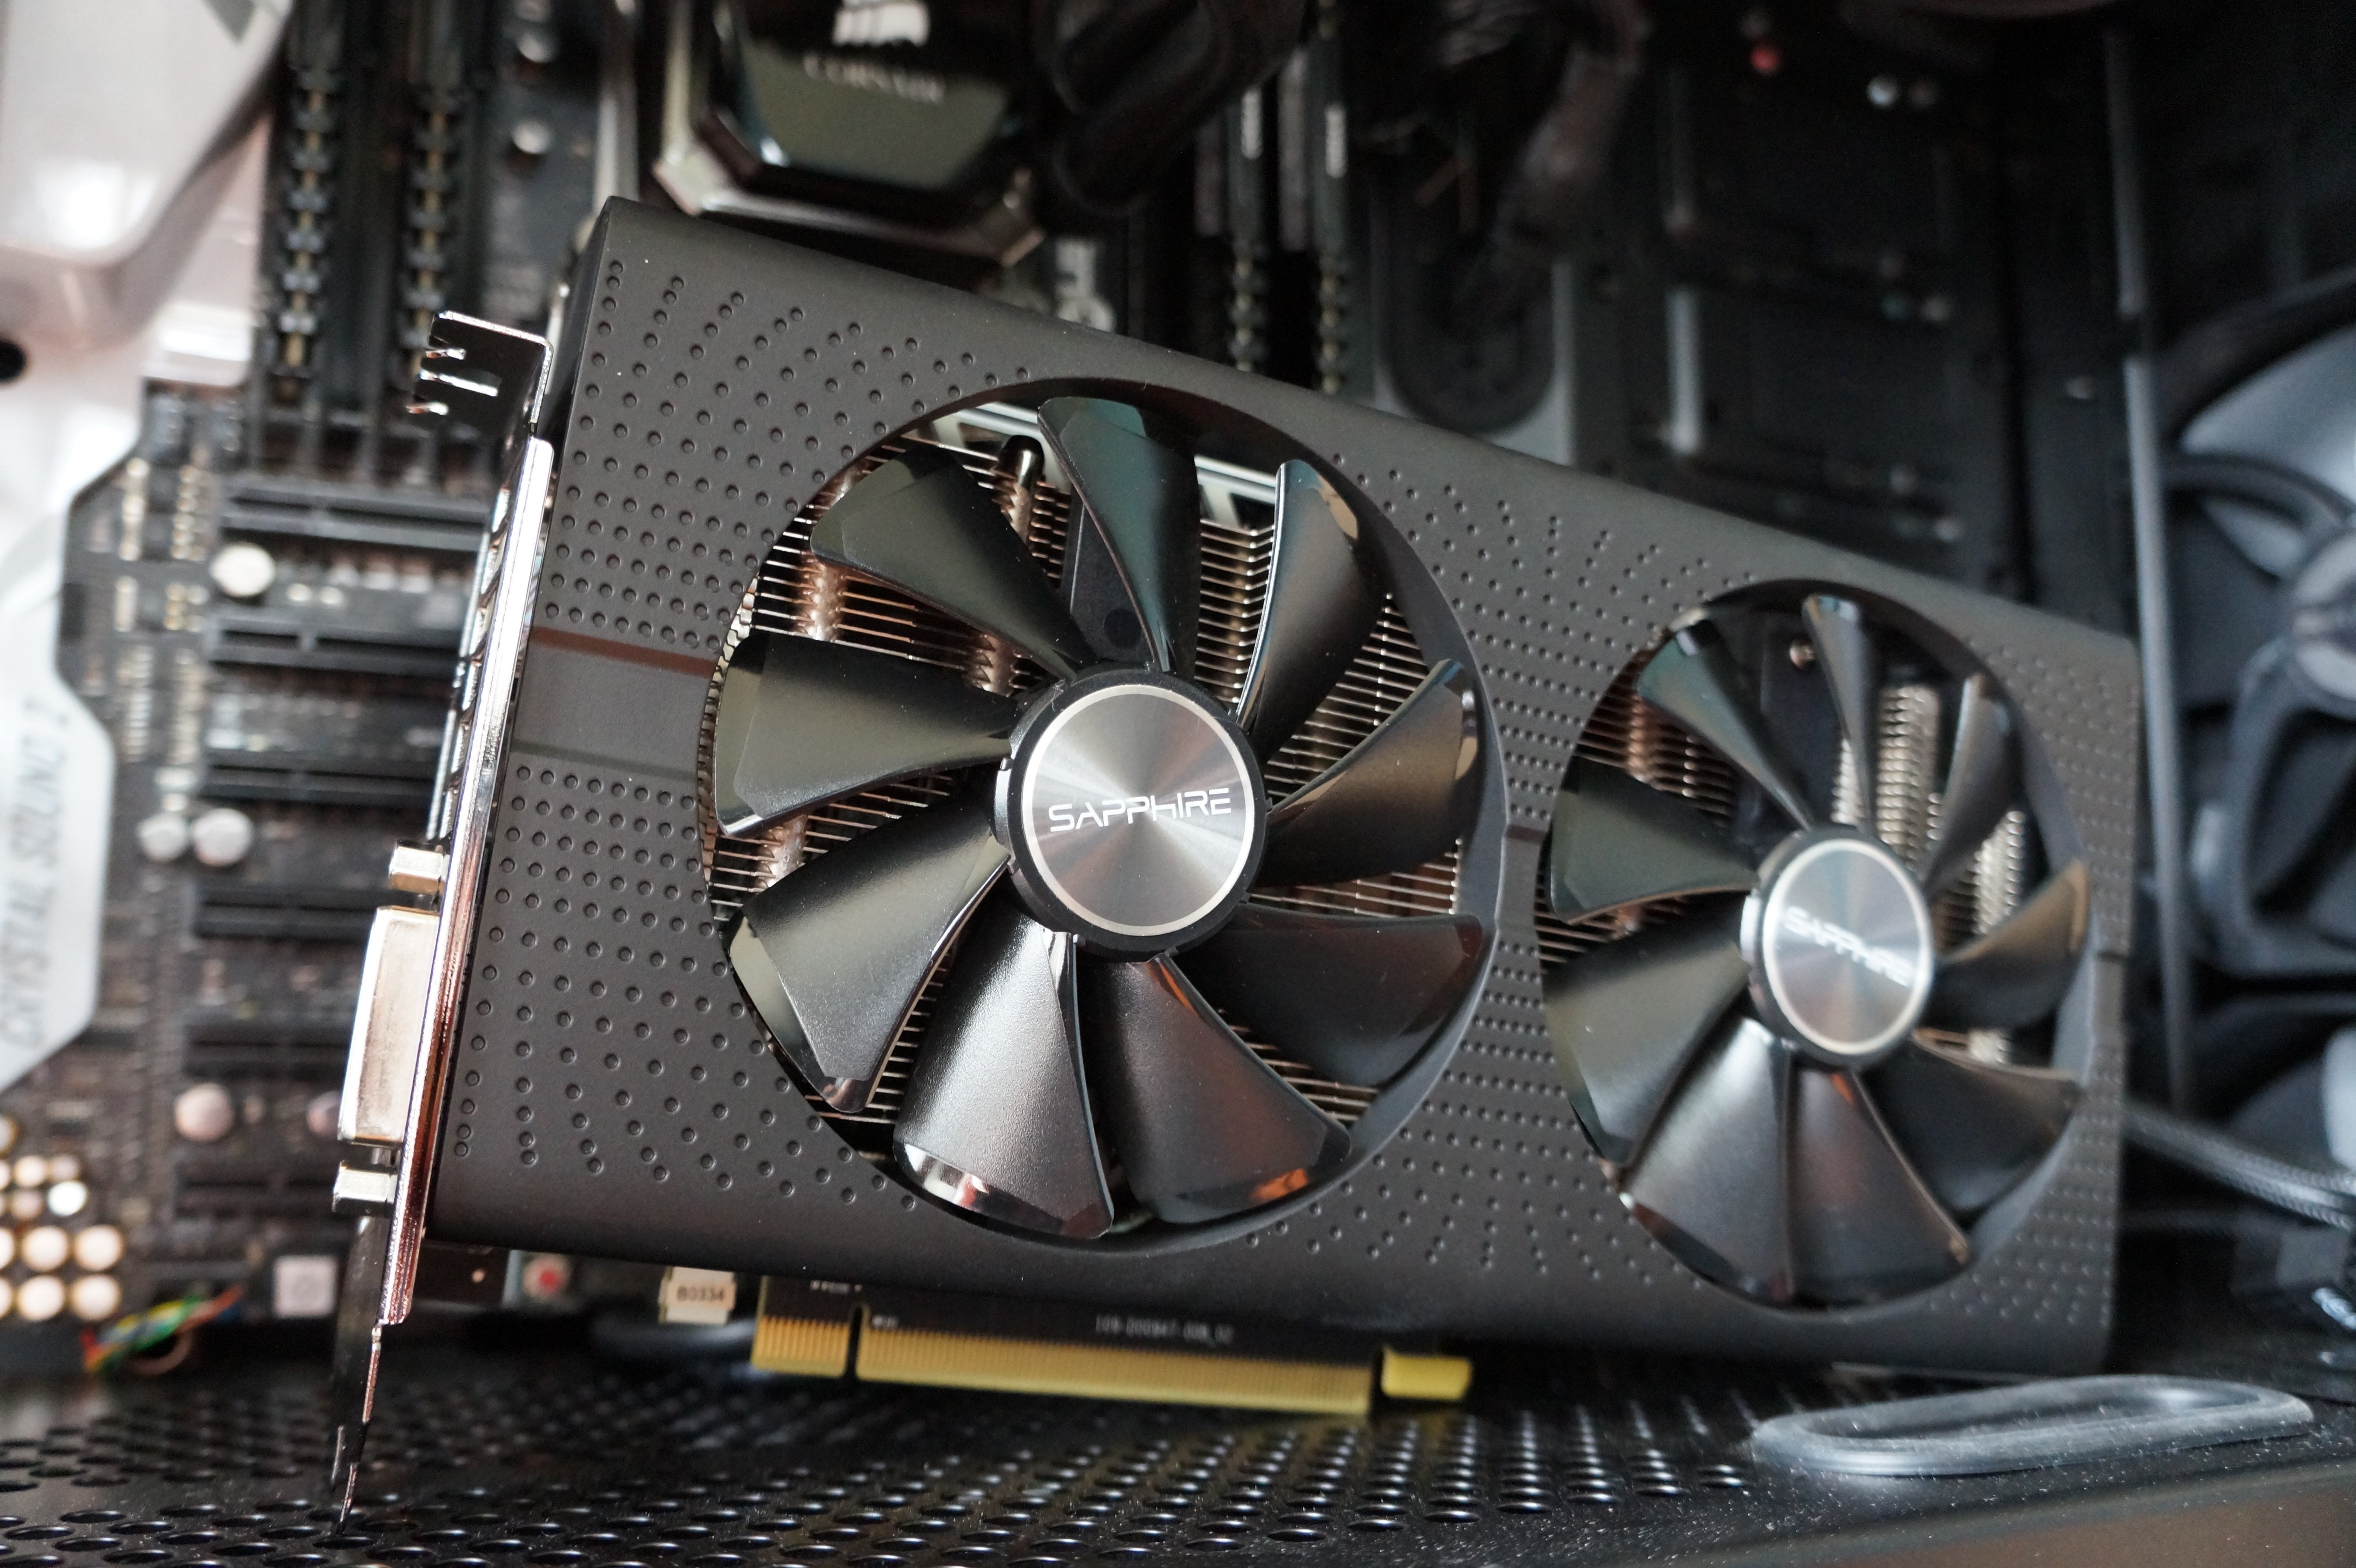 Sapphire Radeon Rx 570 Pulse And Rx 580 Pulse Review Solid Gaming On A Tight Budget Pcworld